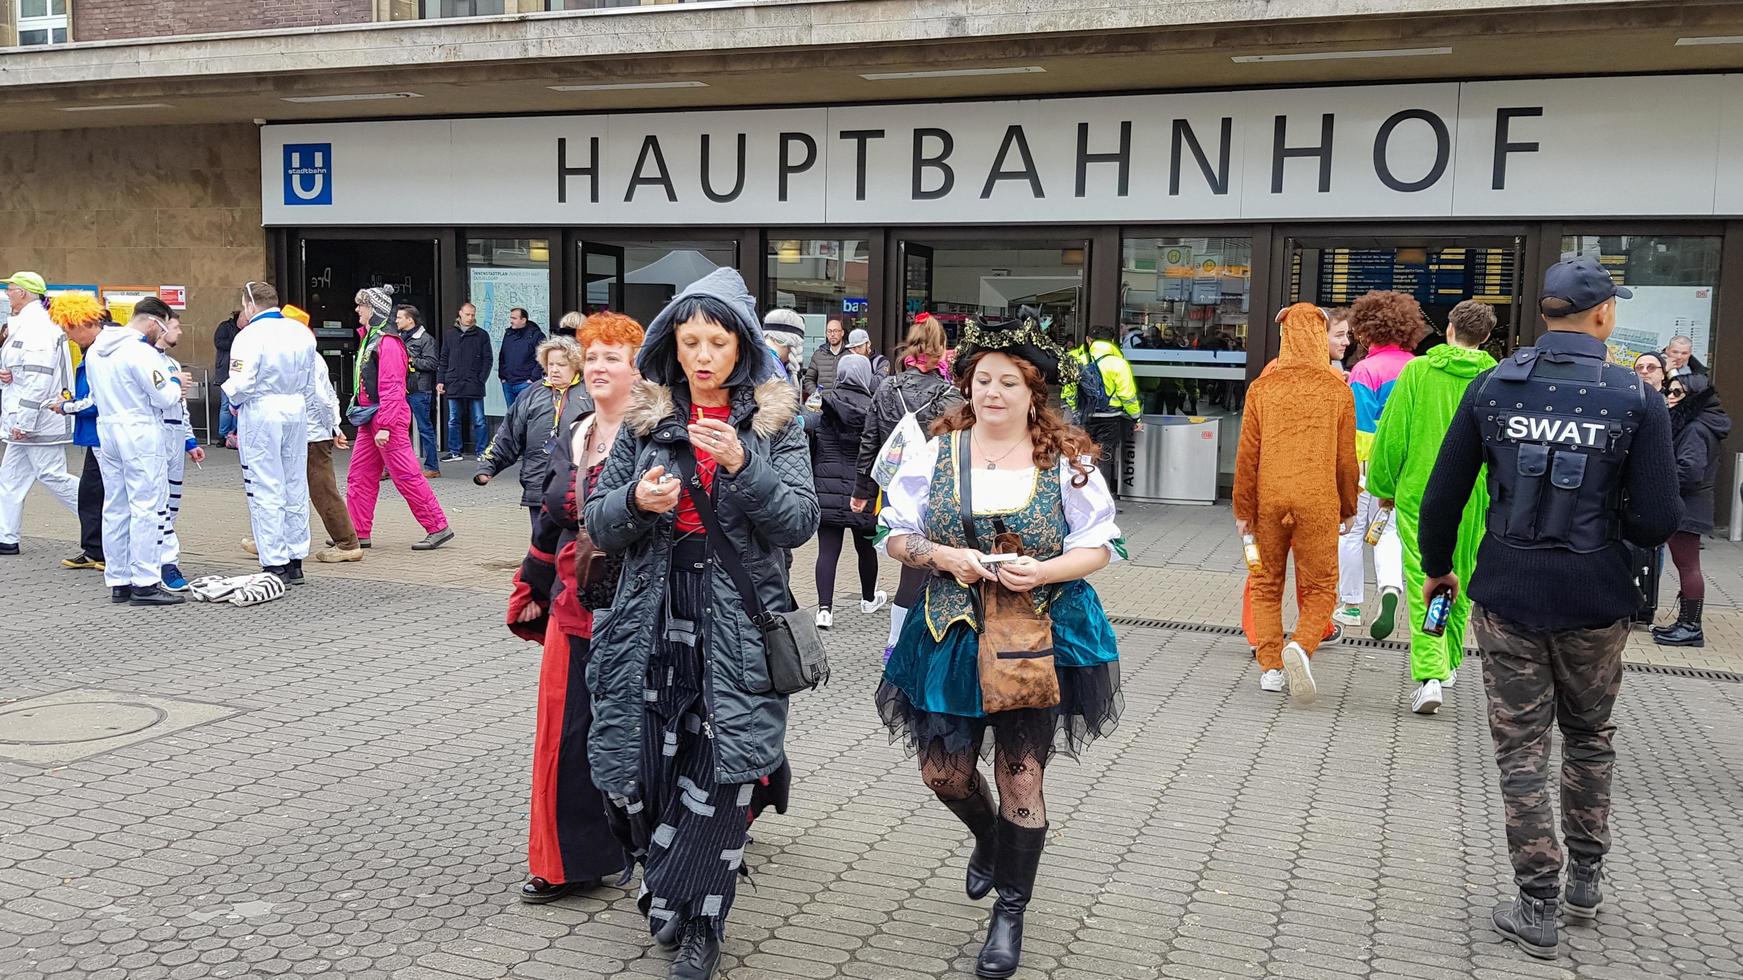 Dusseldorf, Germany - February 26, 2020. Main entrance to the main train station of Dusseldorf Hauptbahnhof during the carnival. Holiday of laughter and colorful dresses. photo